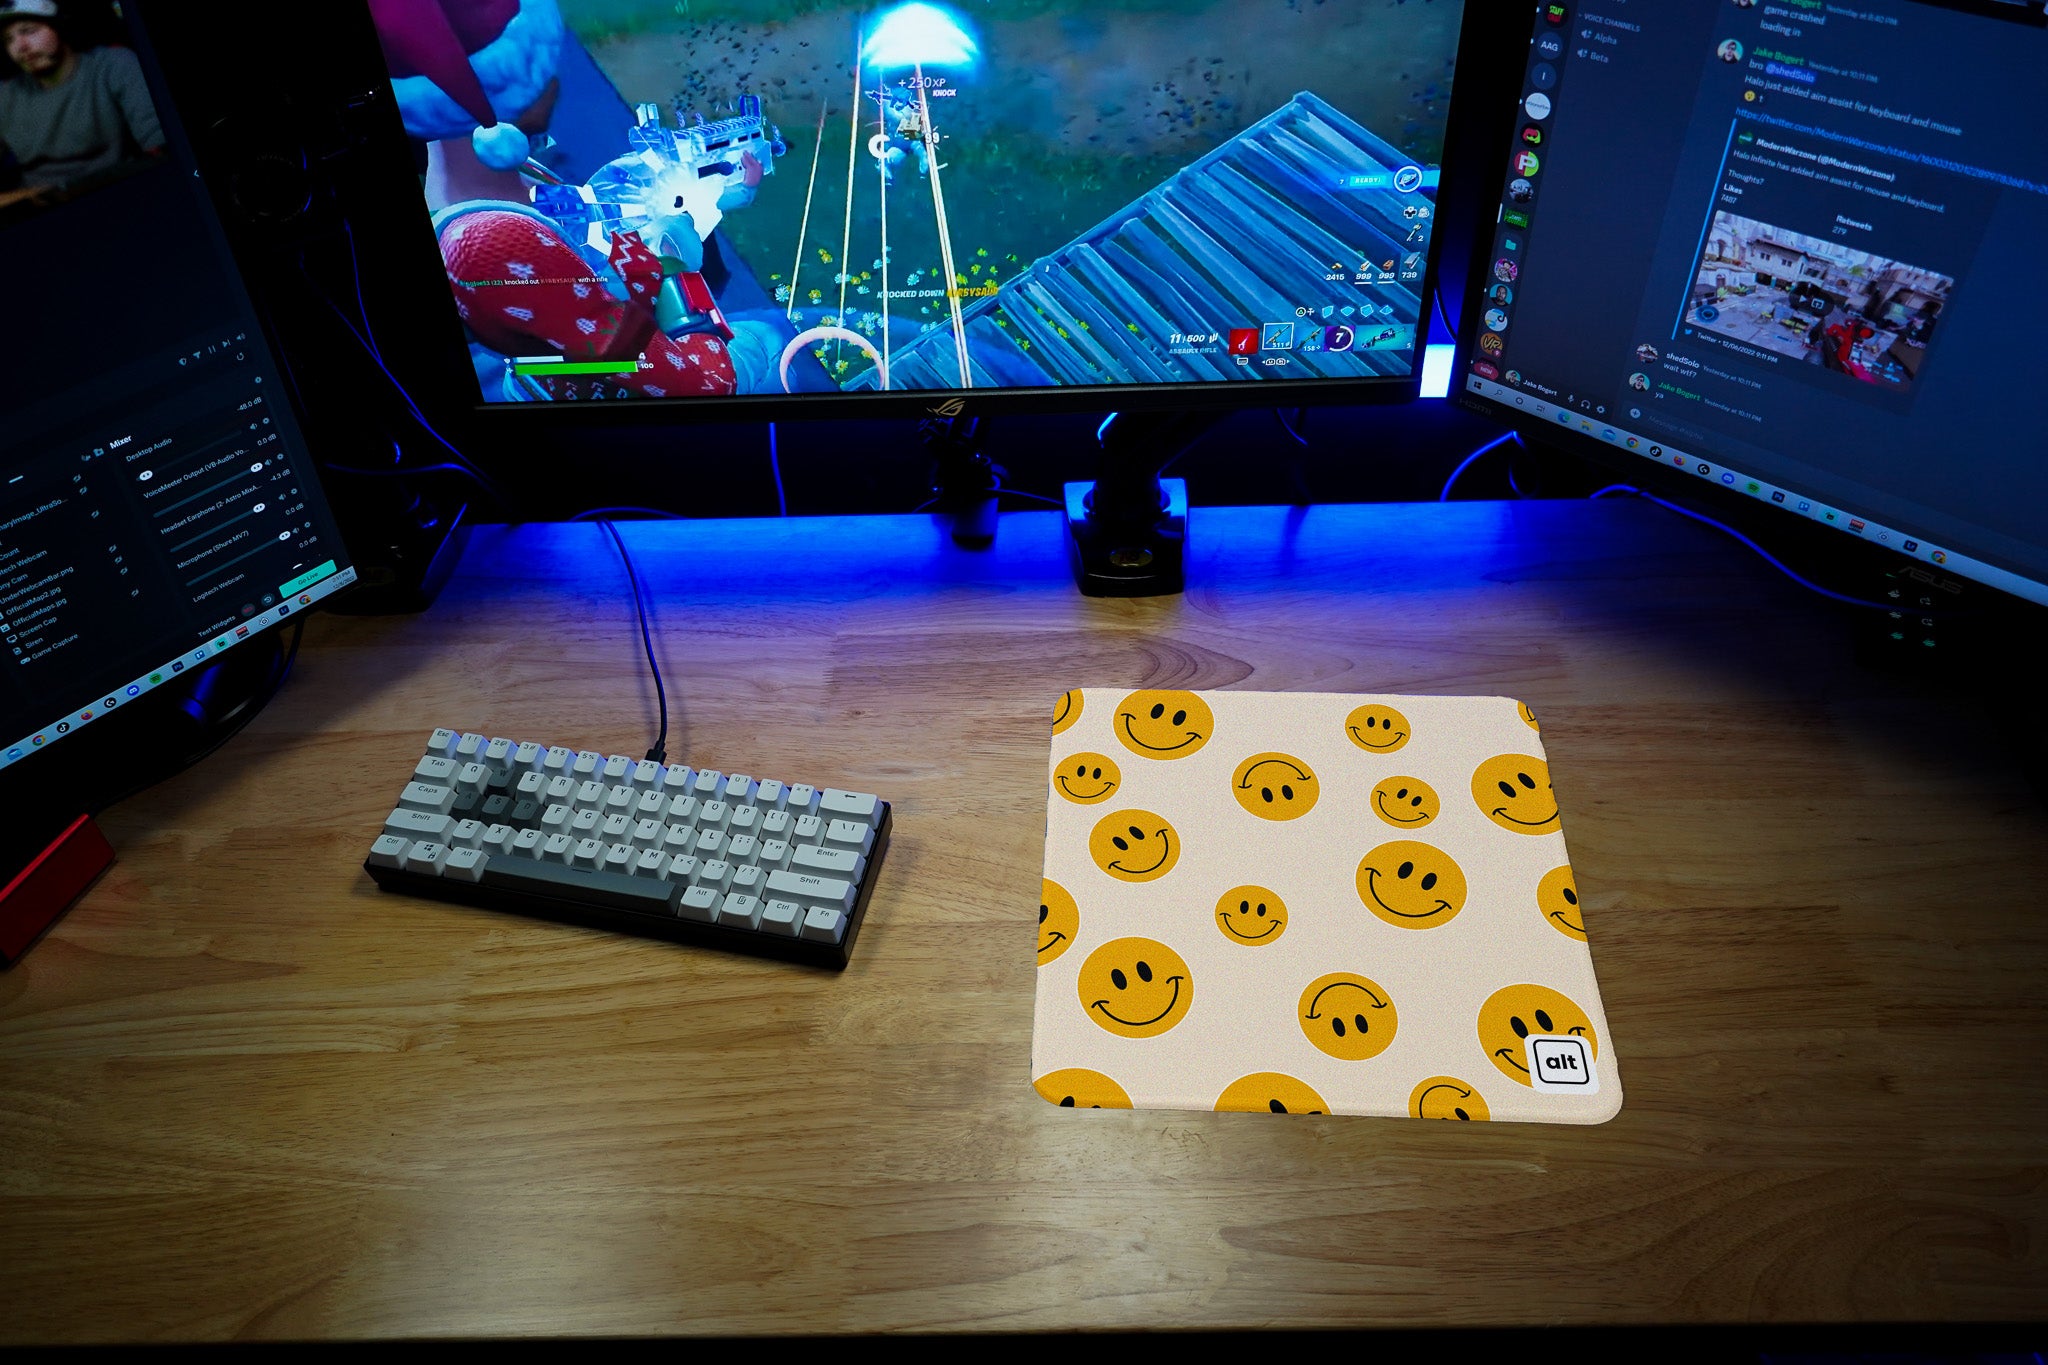 Smiles Only Mousepad